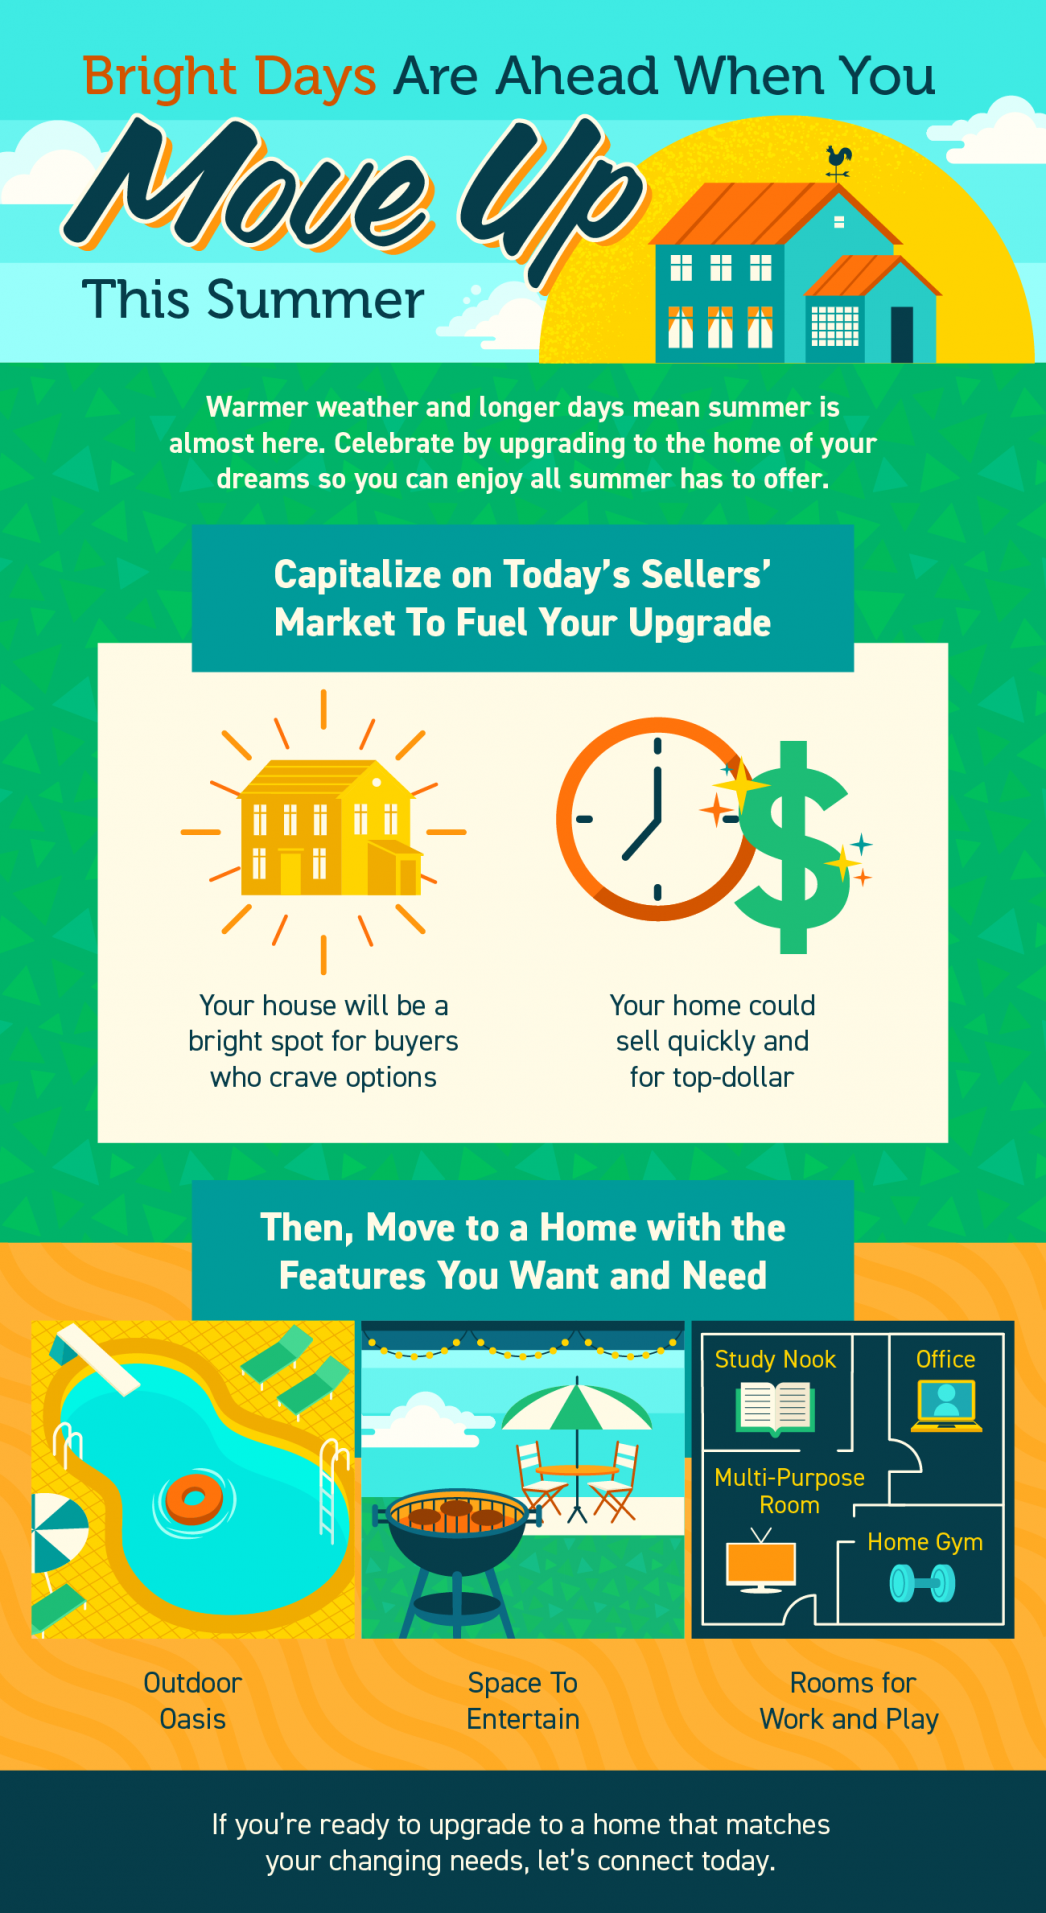 Bright Days Are Ahead When You Move Up This Summer INFOGRAPHIC] | MyKCM